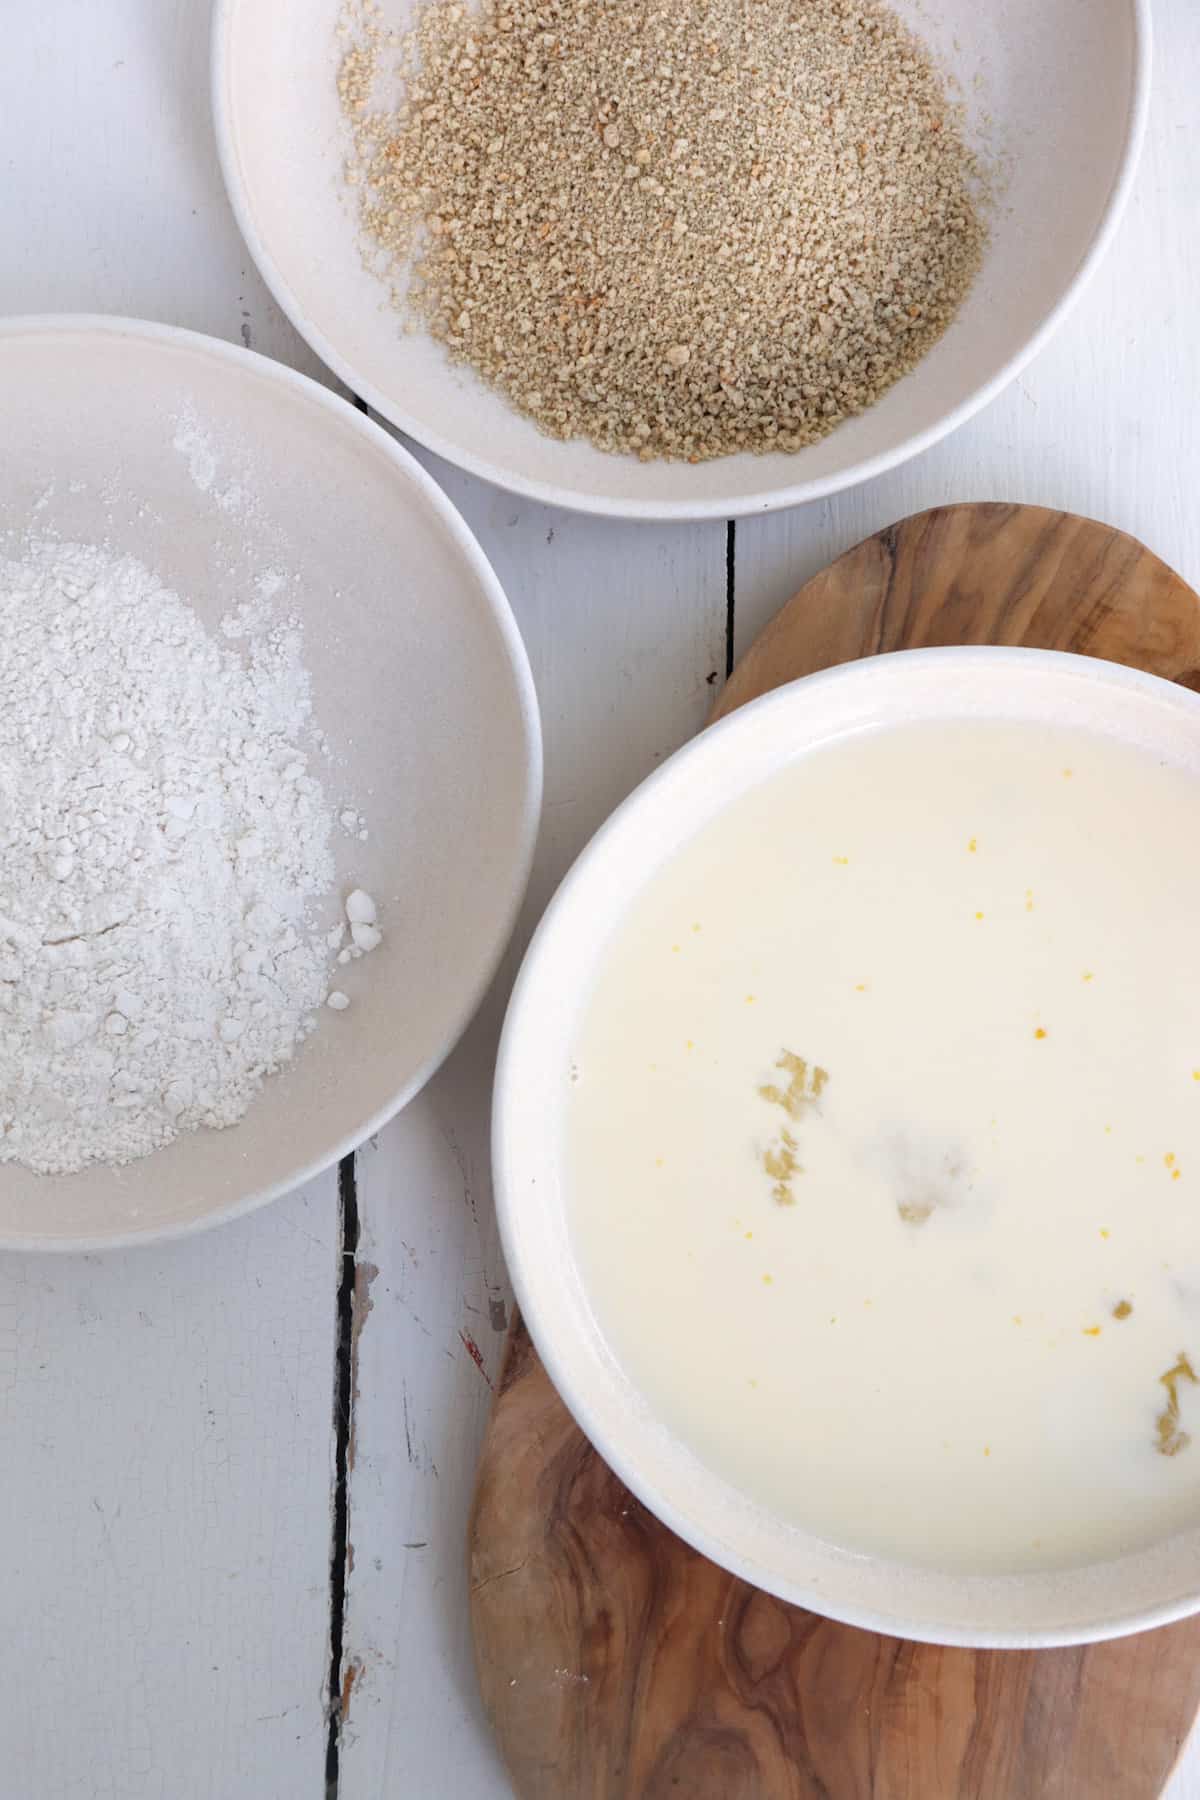 flour, breadcrumbs, and egg wash, in separate bowls.